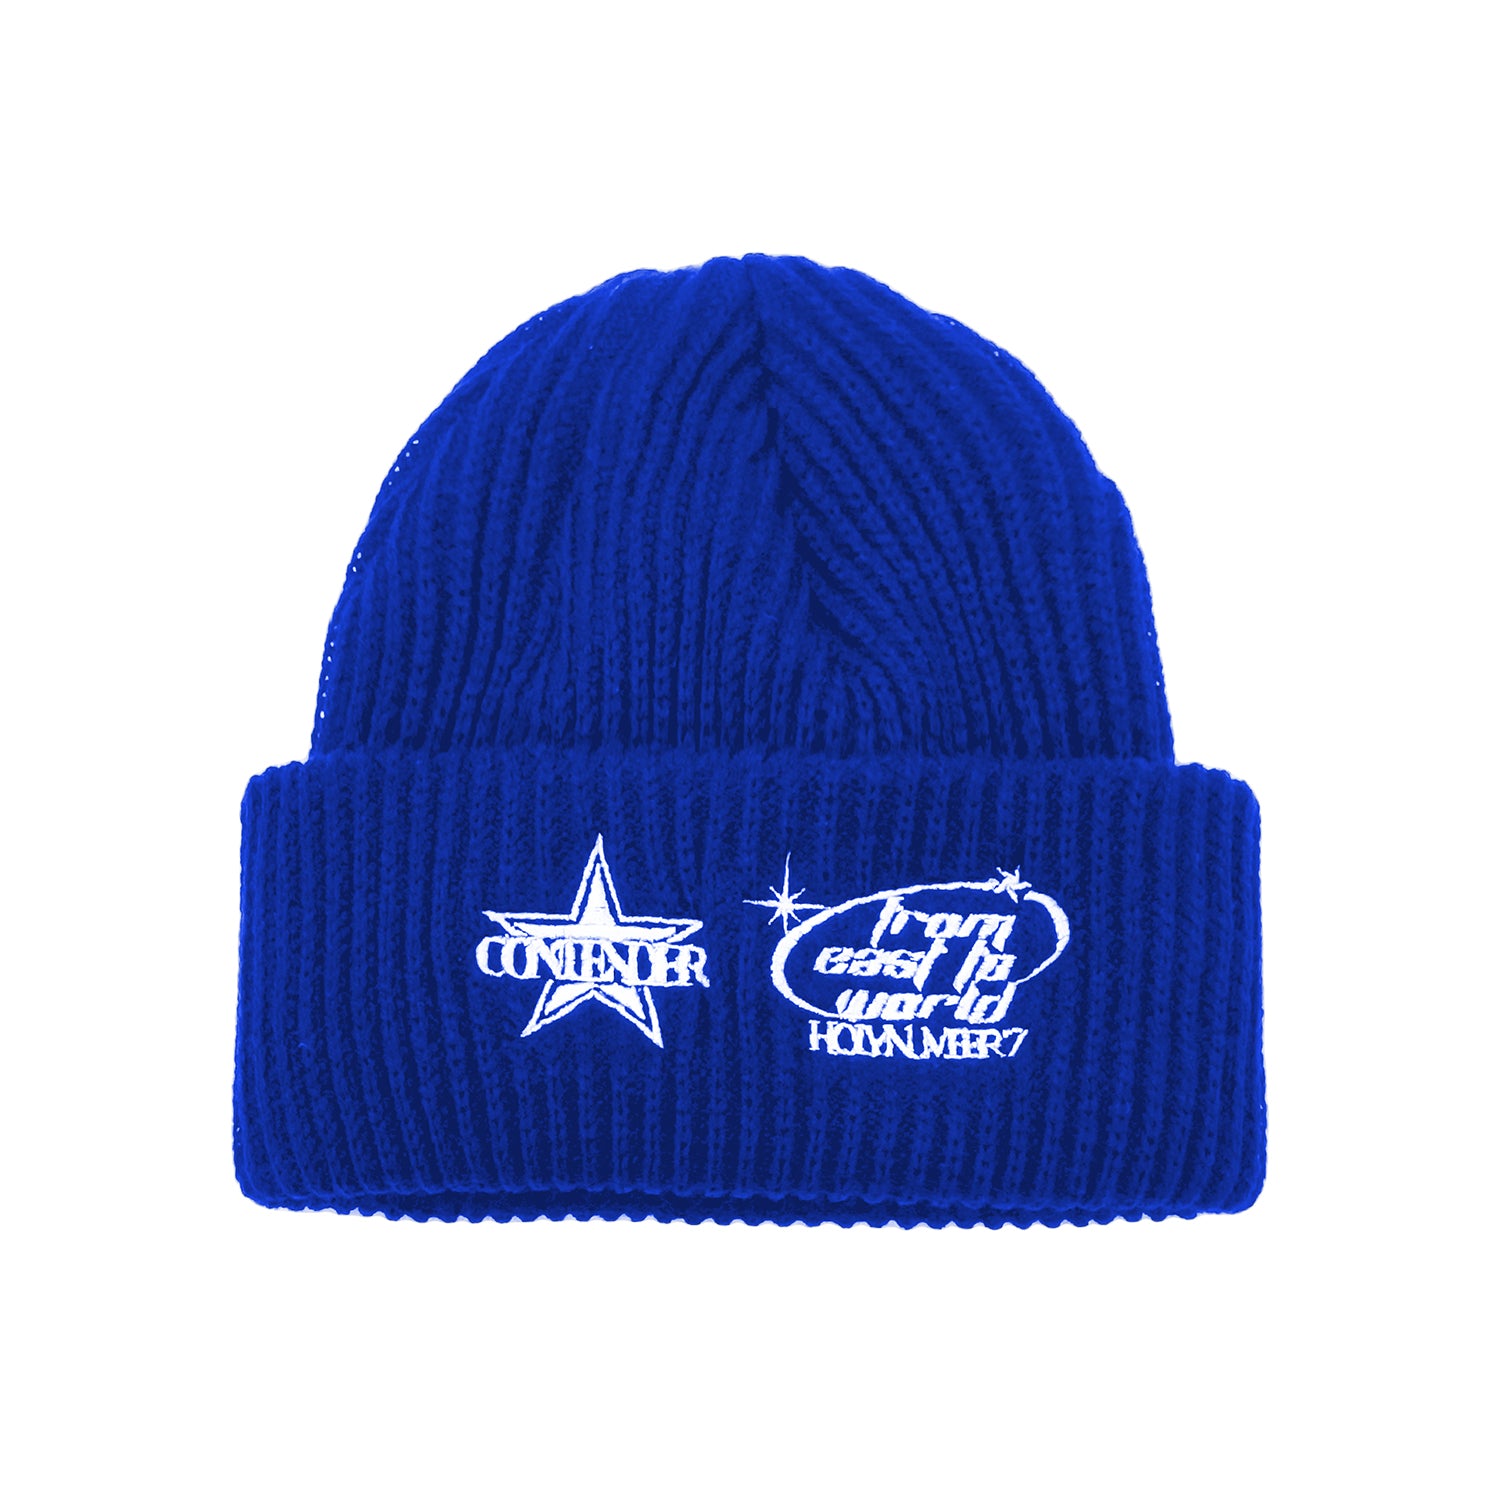 HOLYNUMBER7 X DKZ EMBROIDERY BEANIE_BLUE